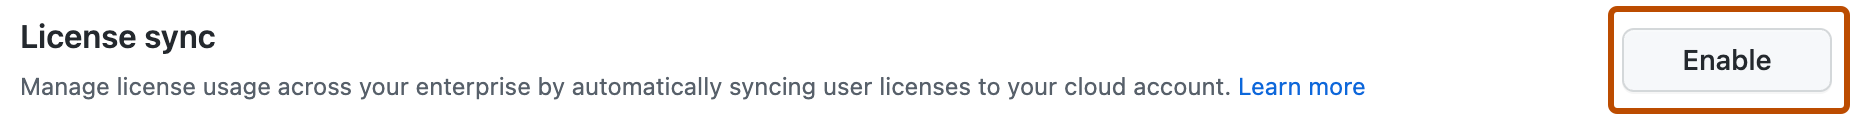 Screenshot of the "License sync" option on the GitHub Connect page. The "Enable" button is highlighted with an orange outline.